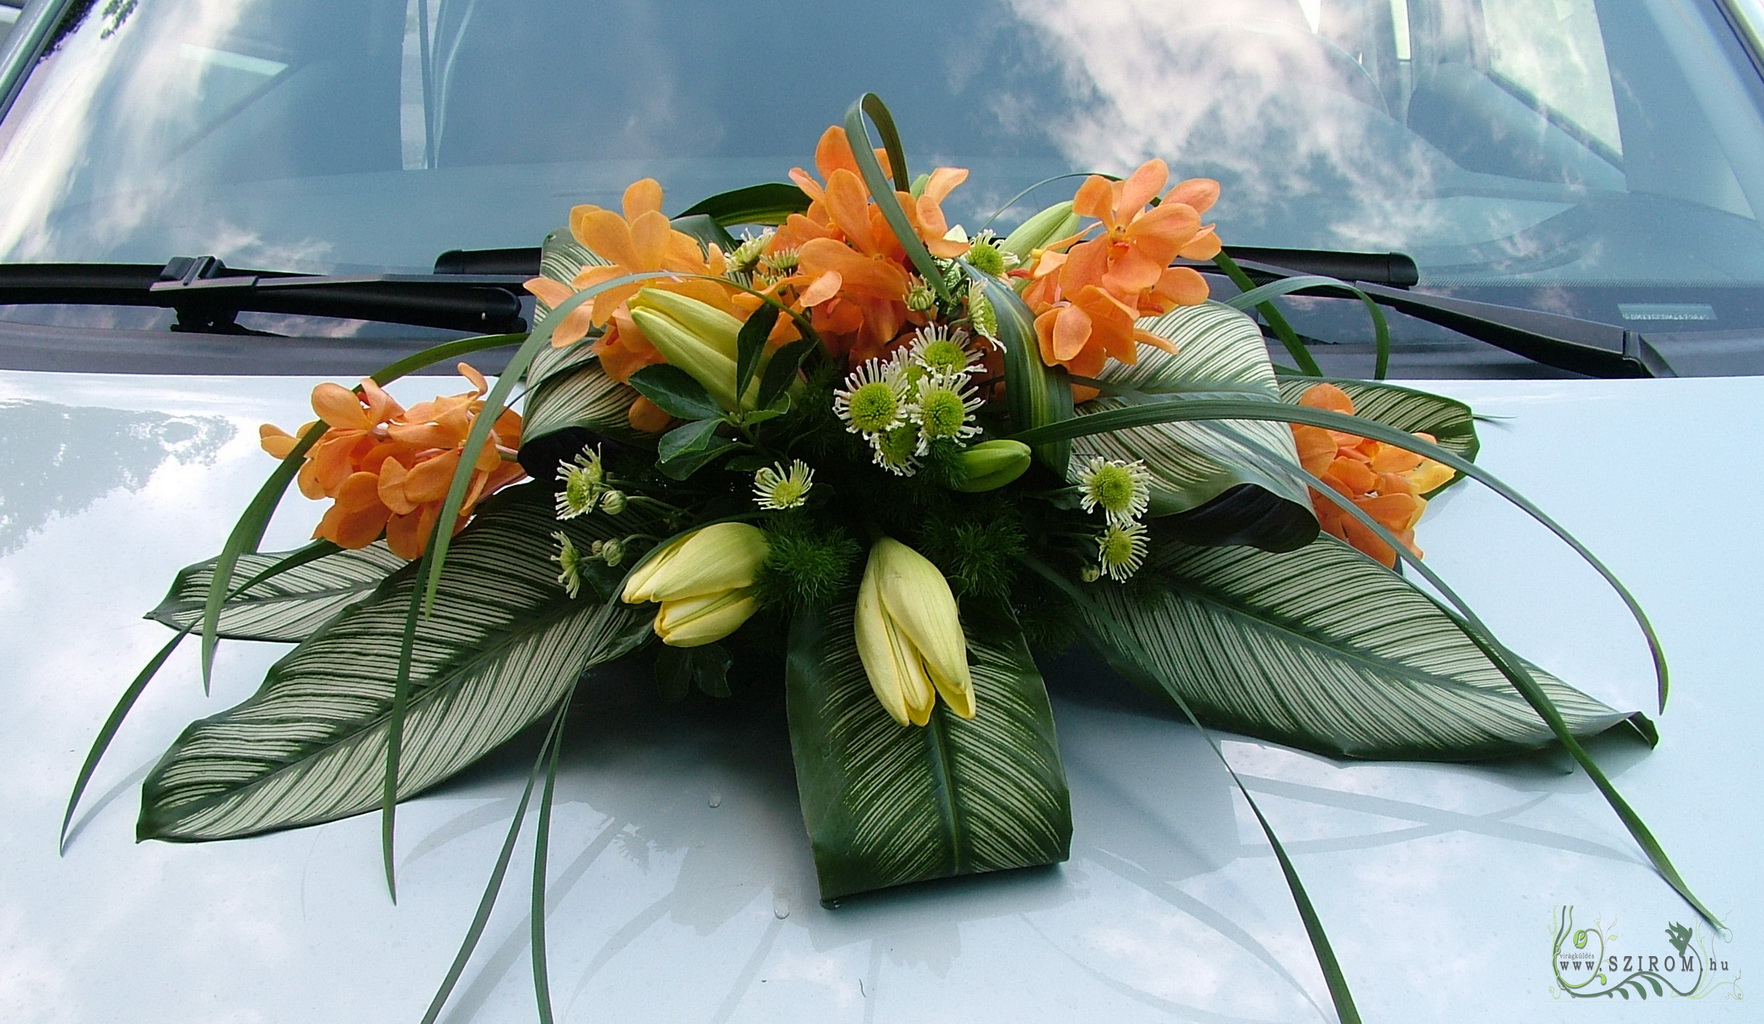 flower delivery Budapest - oval car flower arrangement with orchids (lily, chrysanthemum, orange, yellow, green)